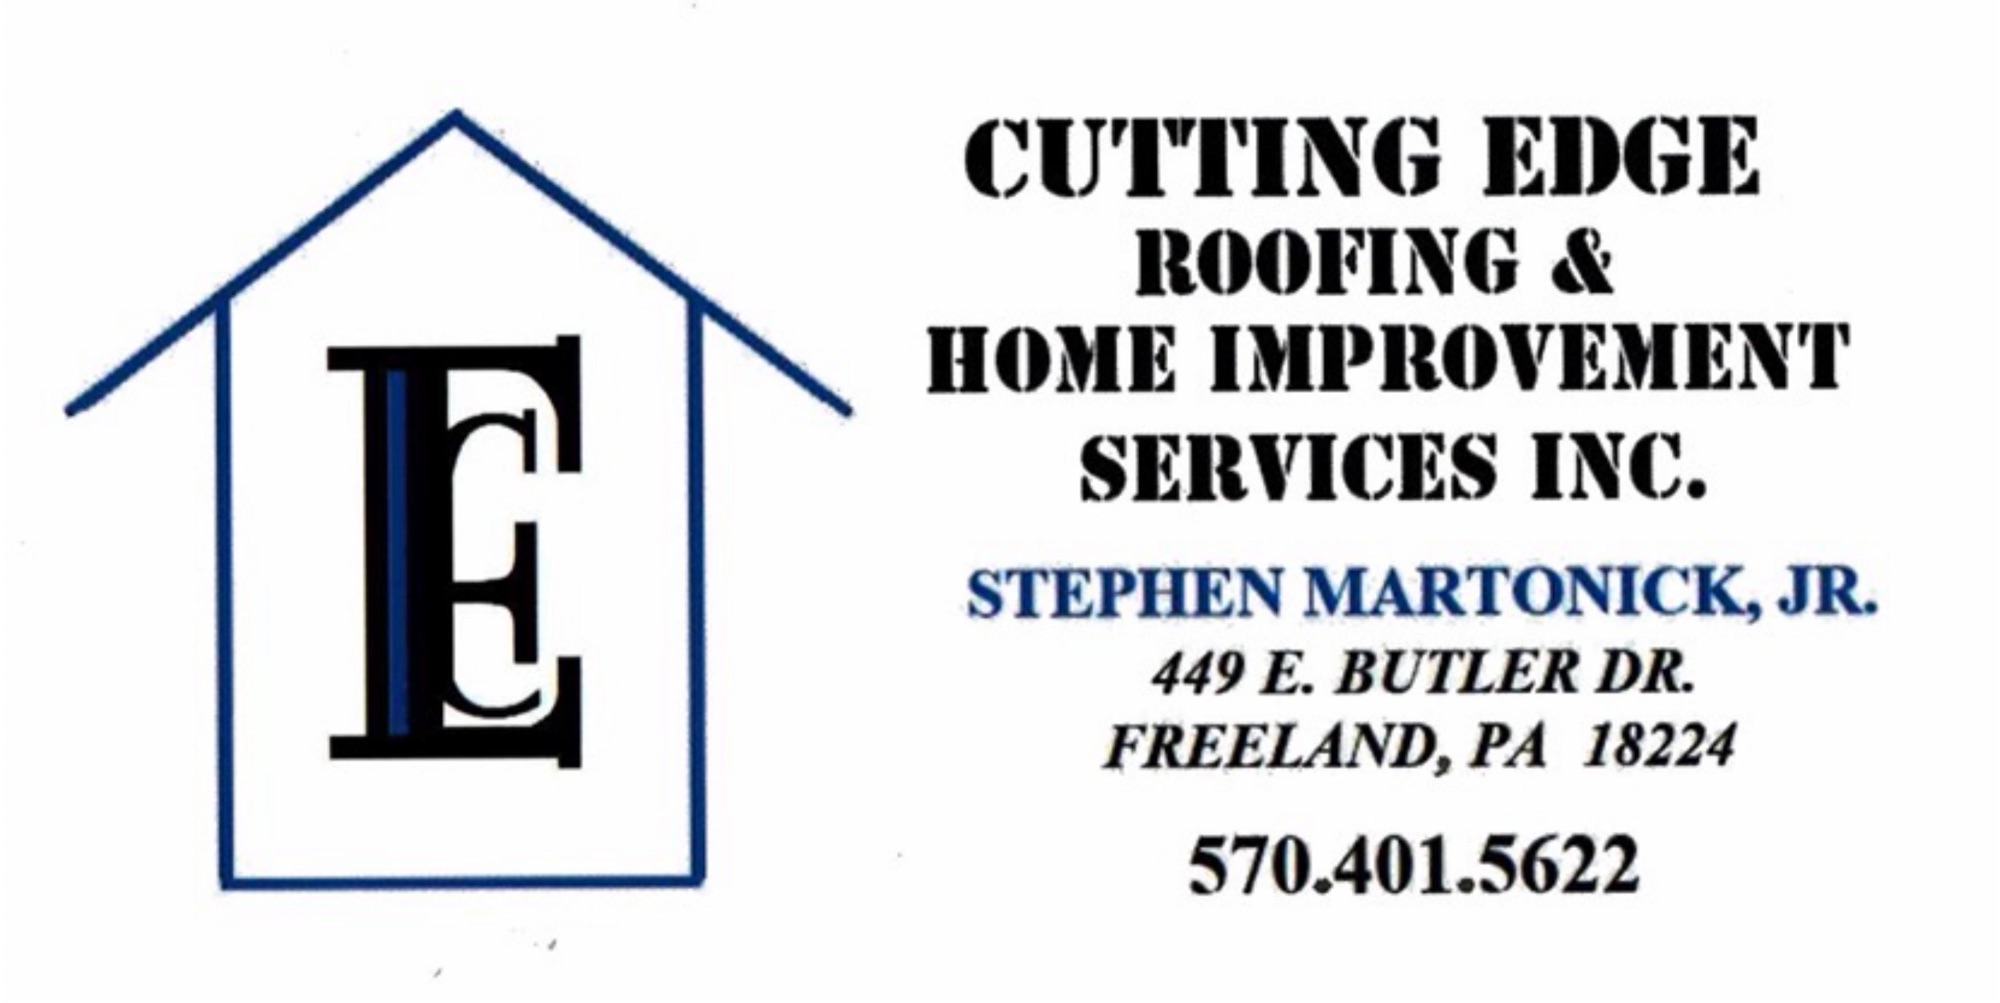 Cutting Edge Roofing and Home Improvement Services, Inc. Logo